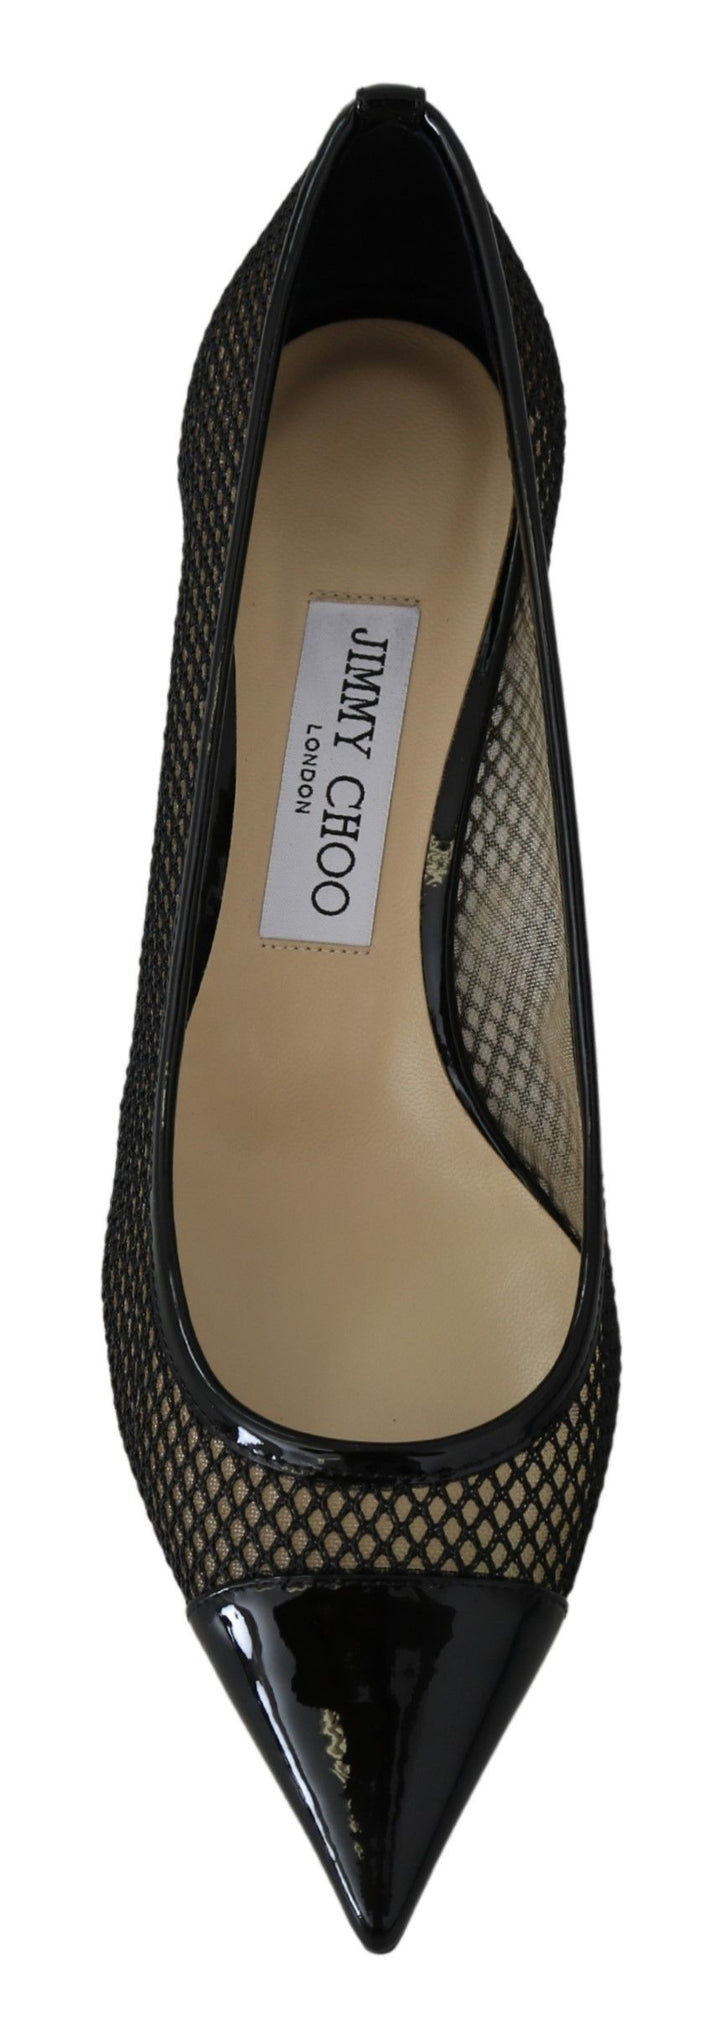 Jimmy Choo Chic Patent Mesh Pointed Pumps